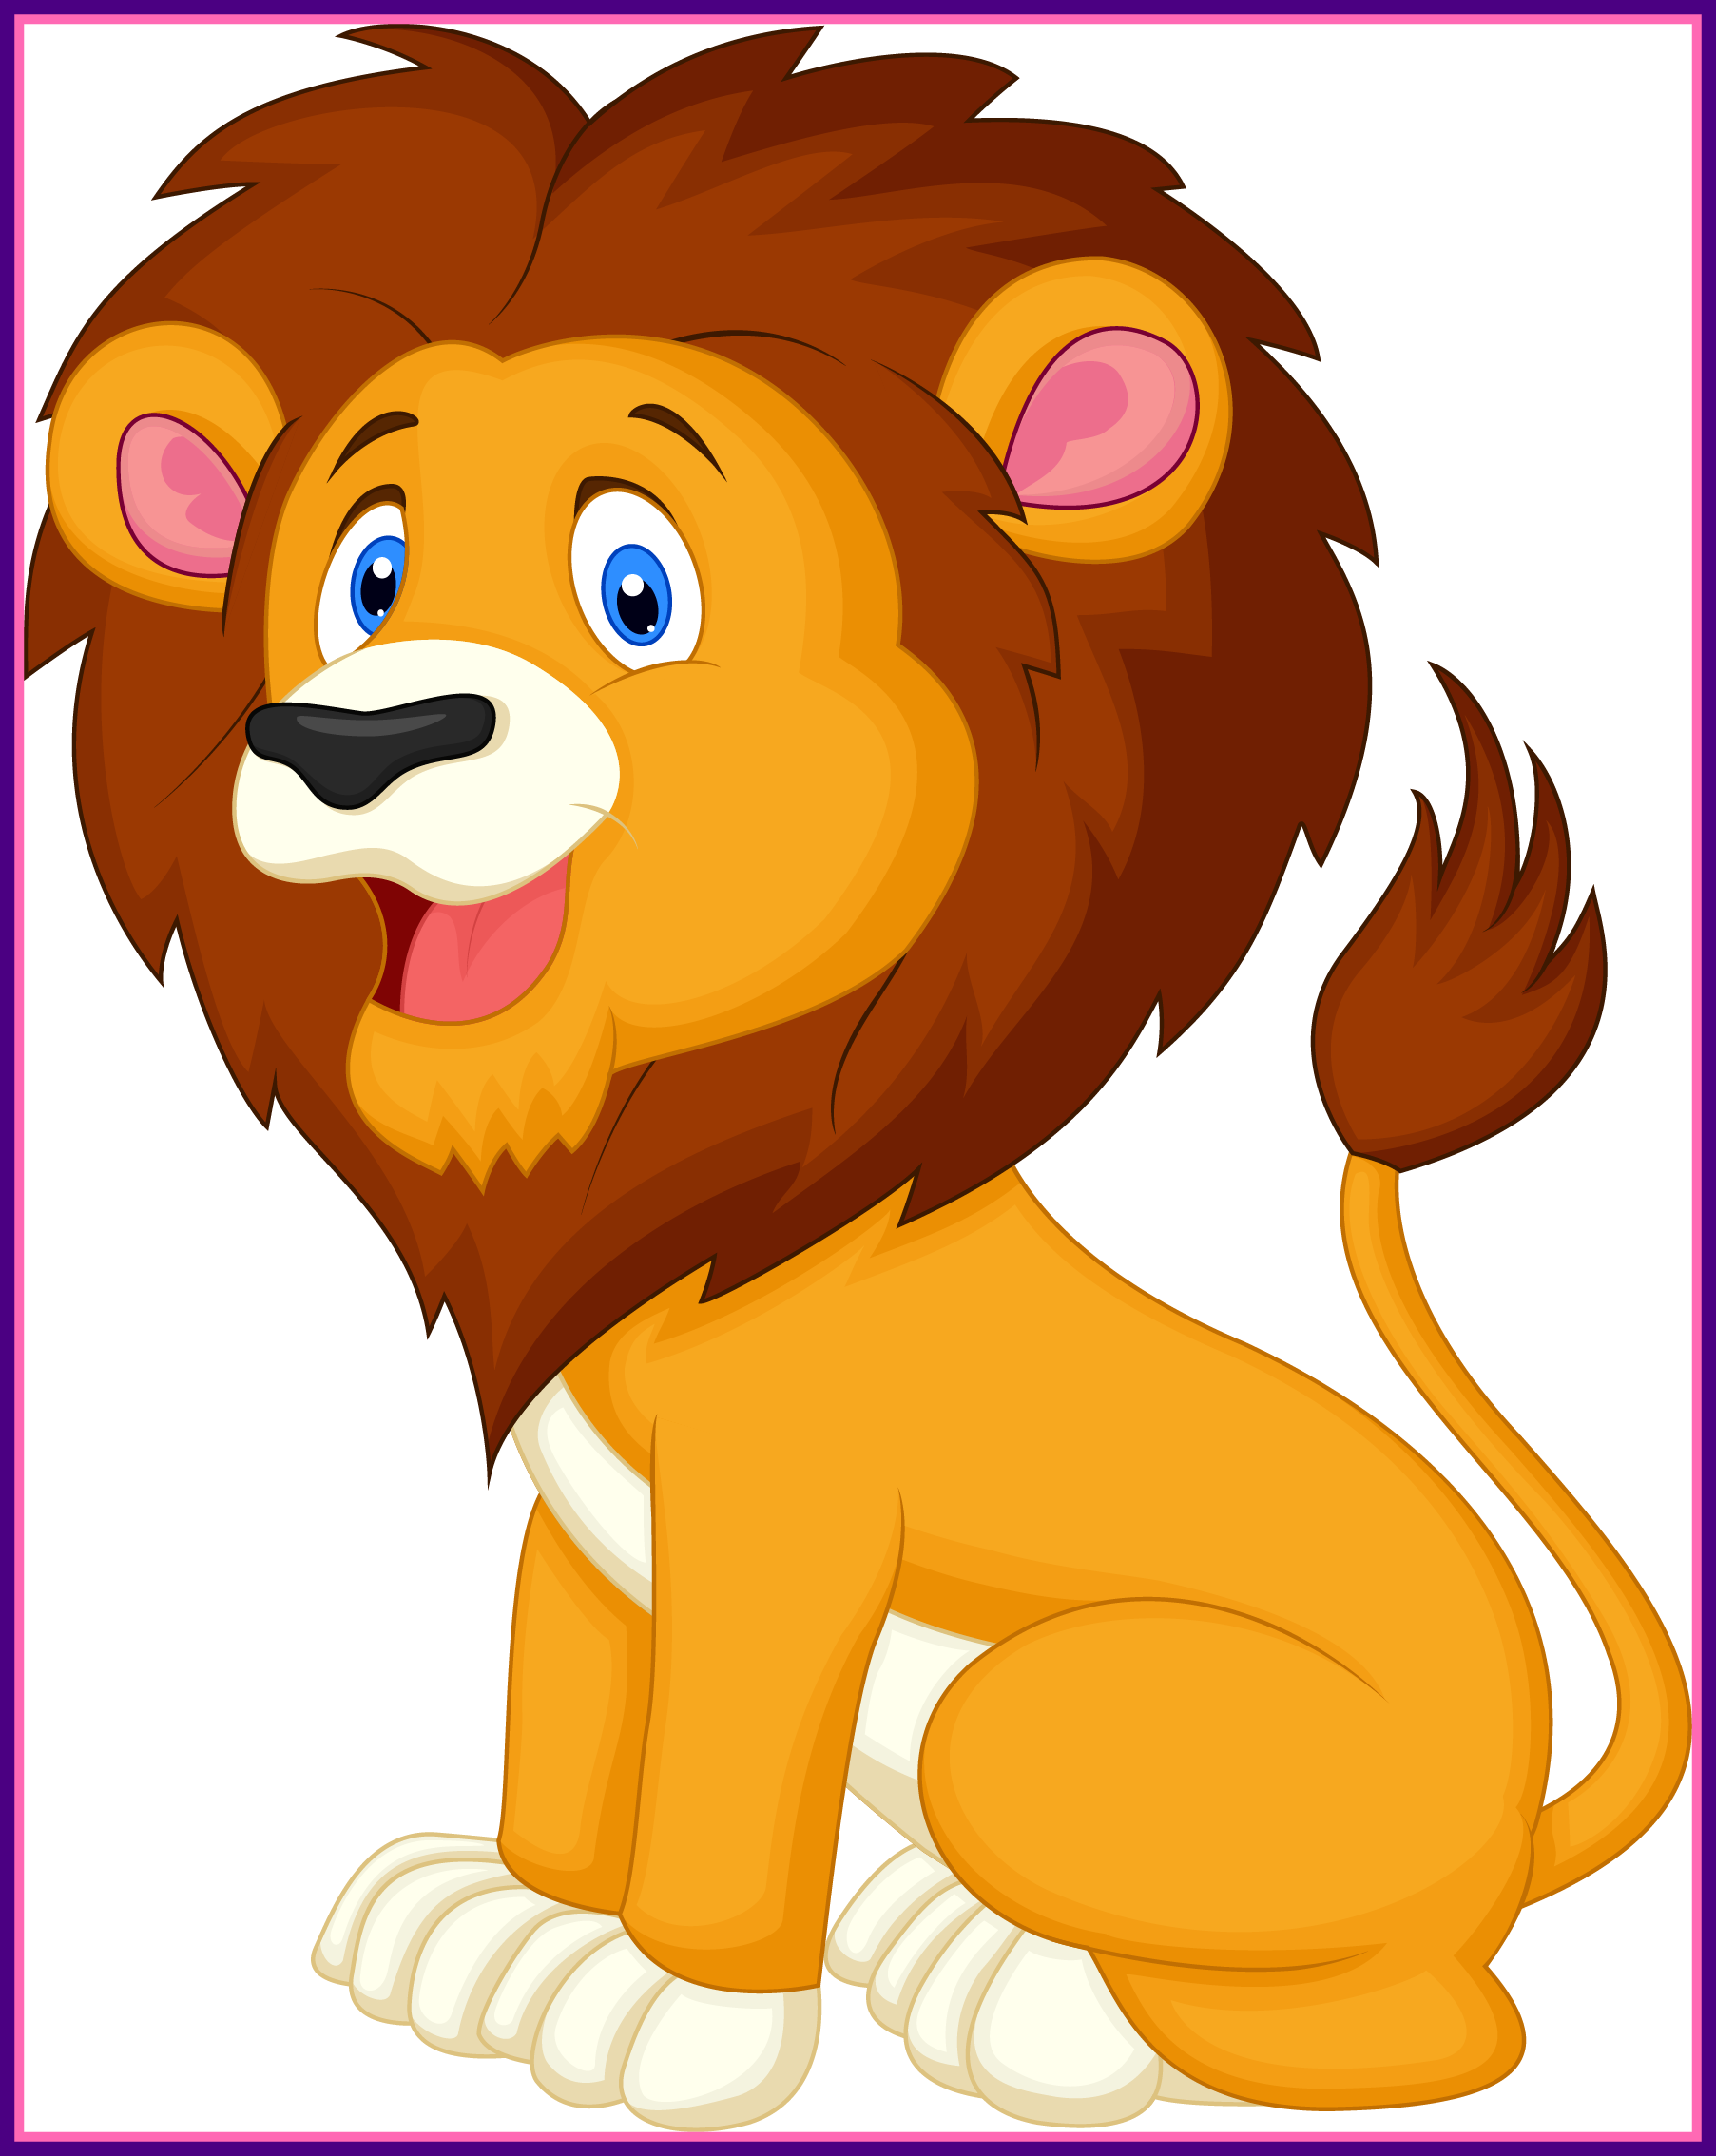 Lion clipart easy, Lion easy Transparent FREE for download on ...